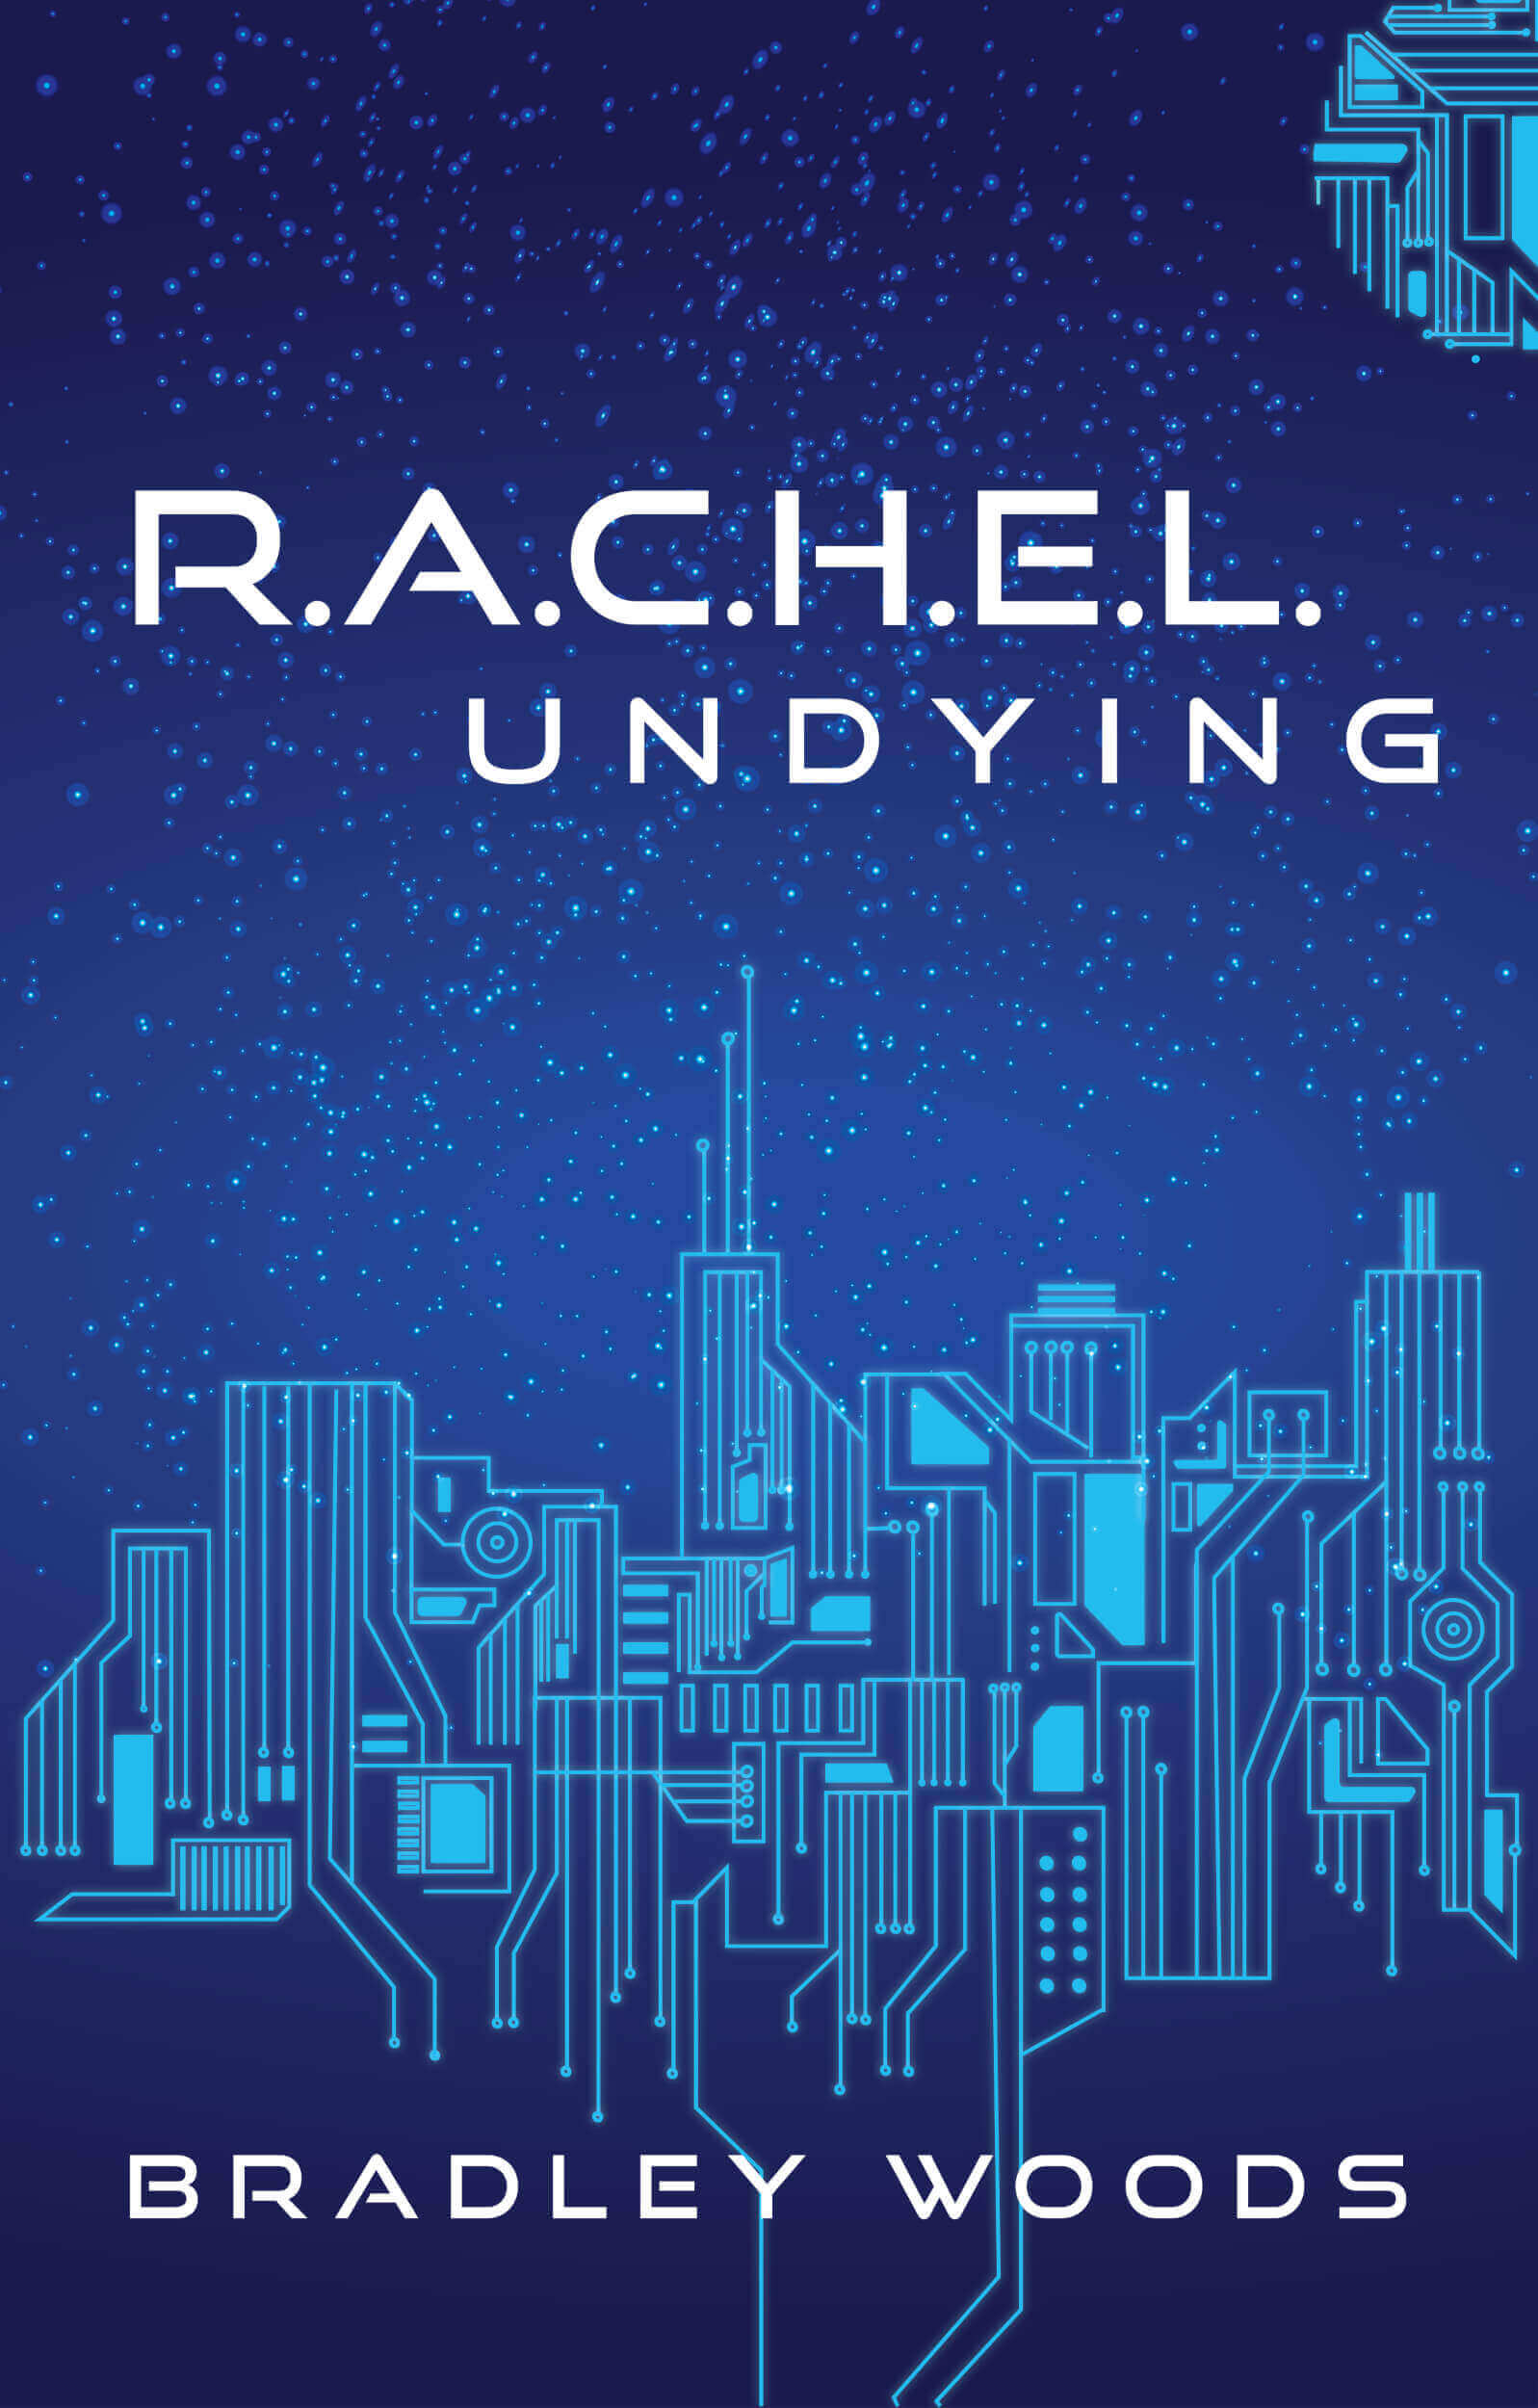 Cover of R.A.C.H.E.L. Undying by Bradley Woods and link to buy the book